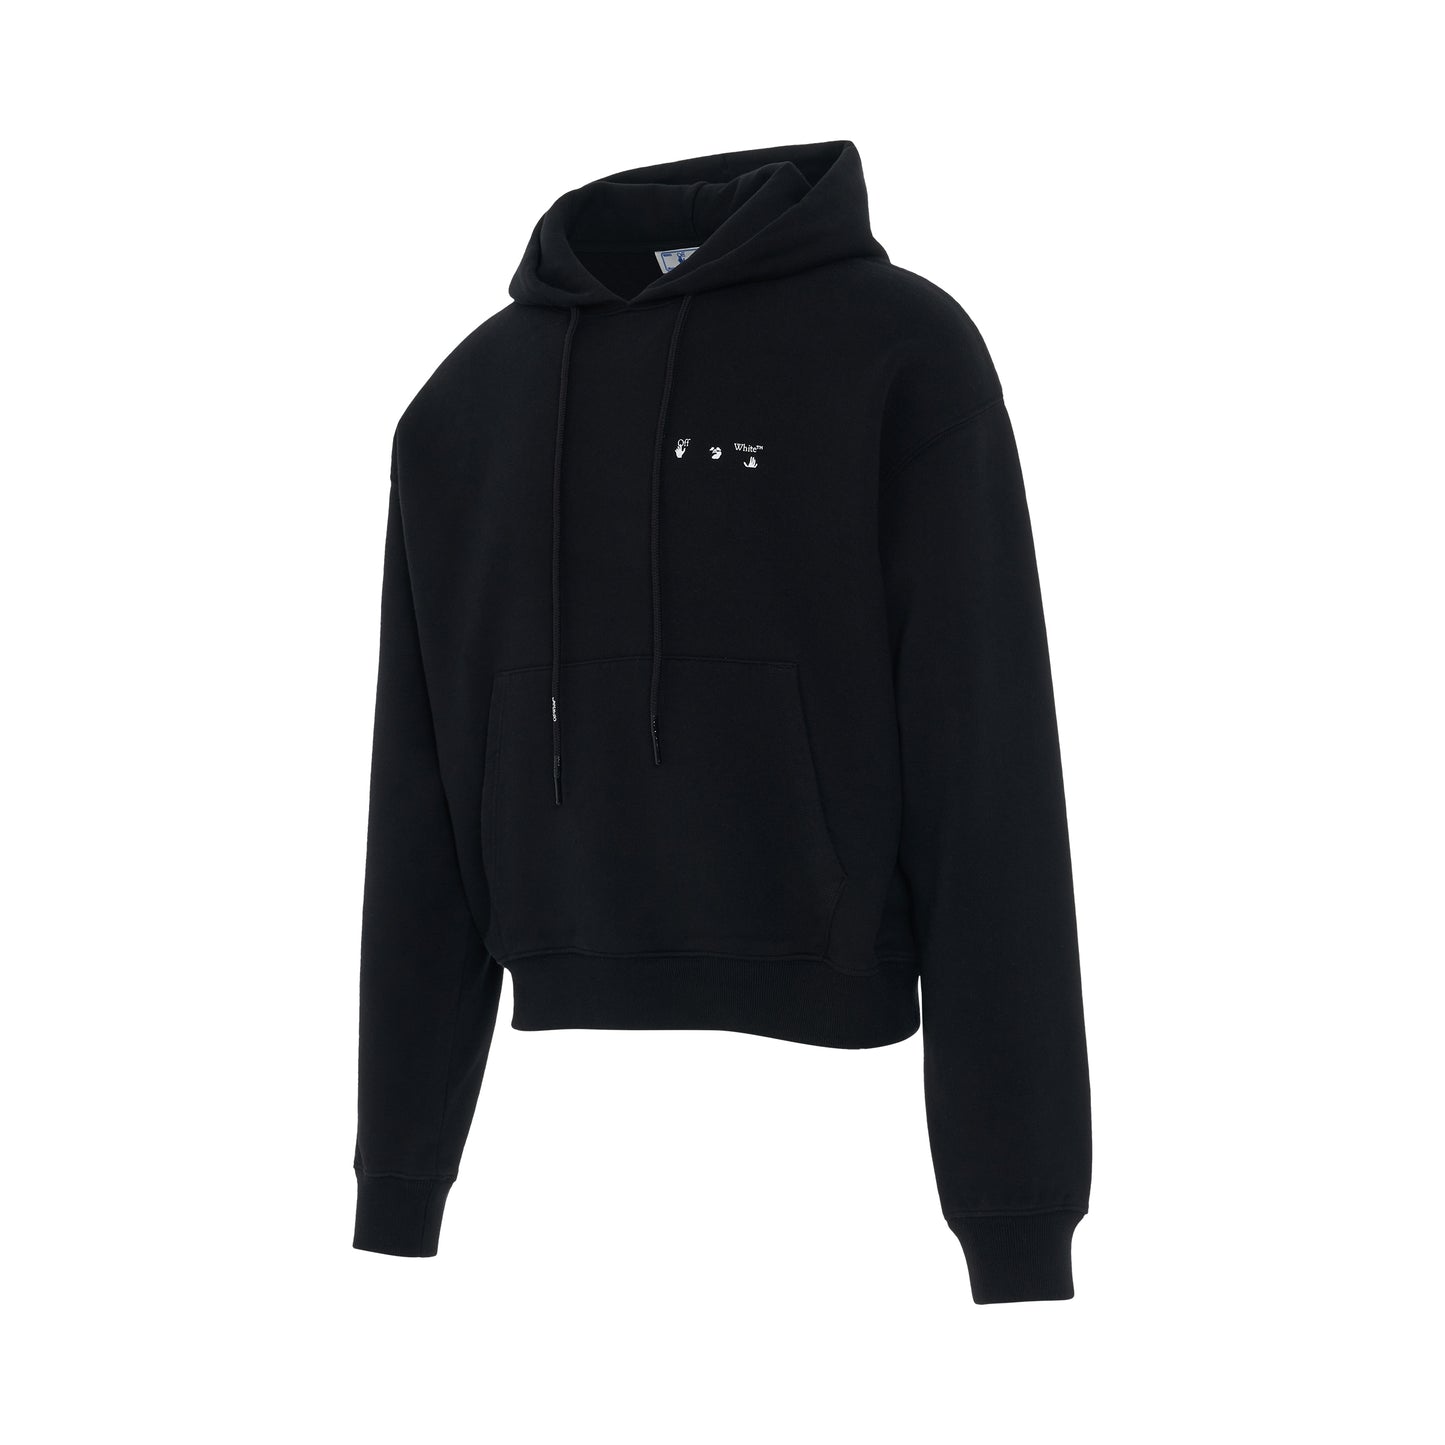 Caravaggio Paint Oversize Fit Hoodie in Black/White